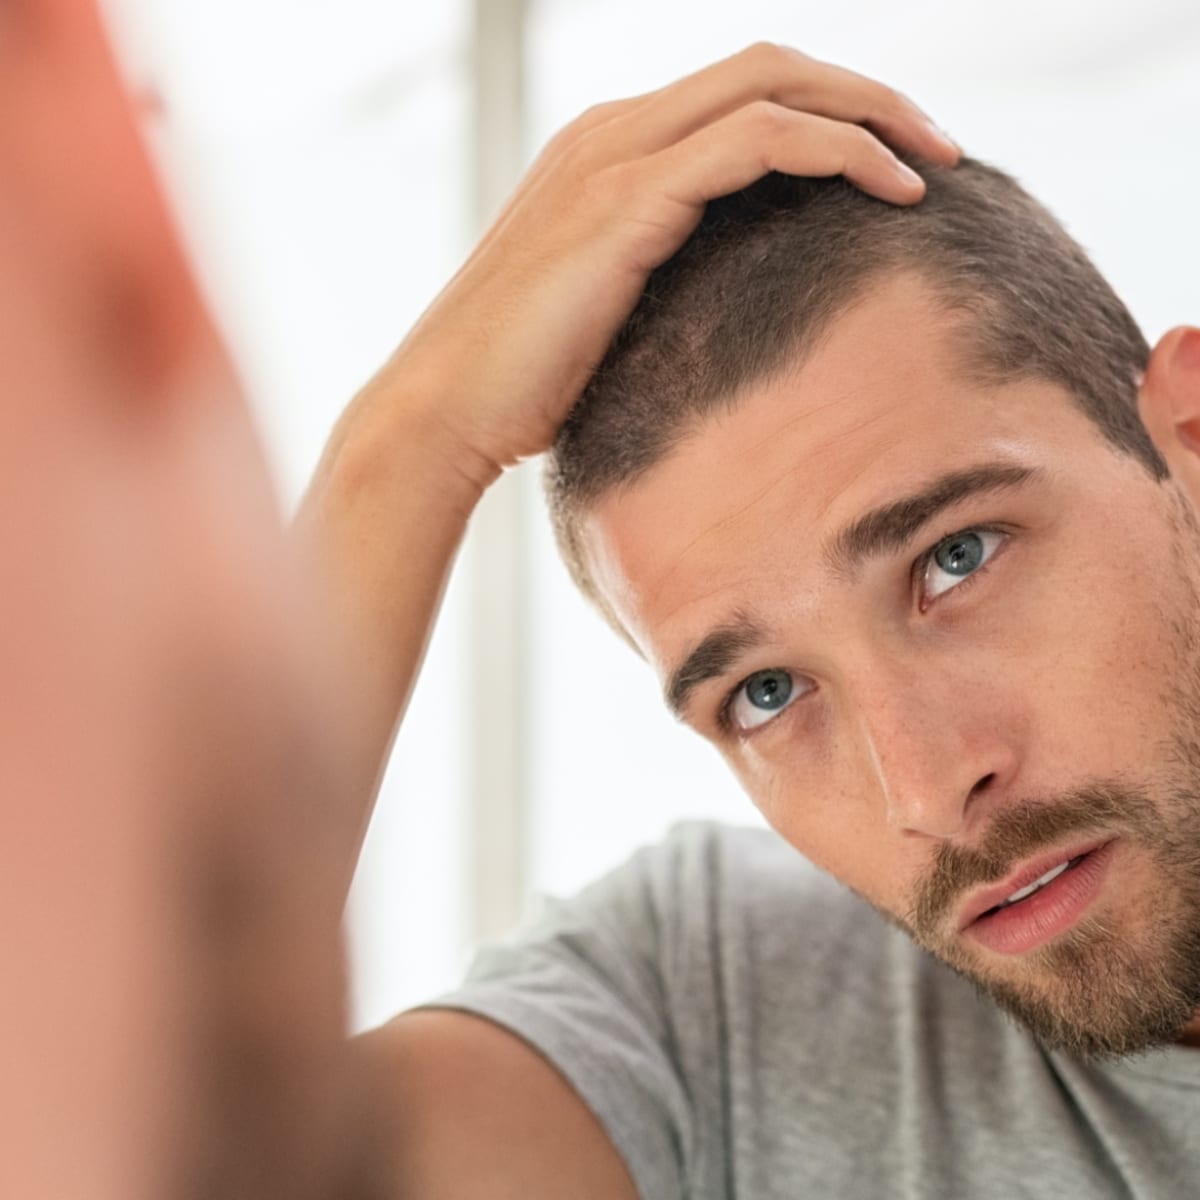 The Most Popular Haircut Designs & Styles For Men in 2023